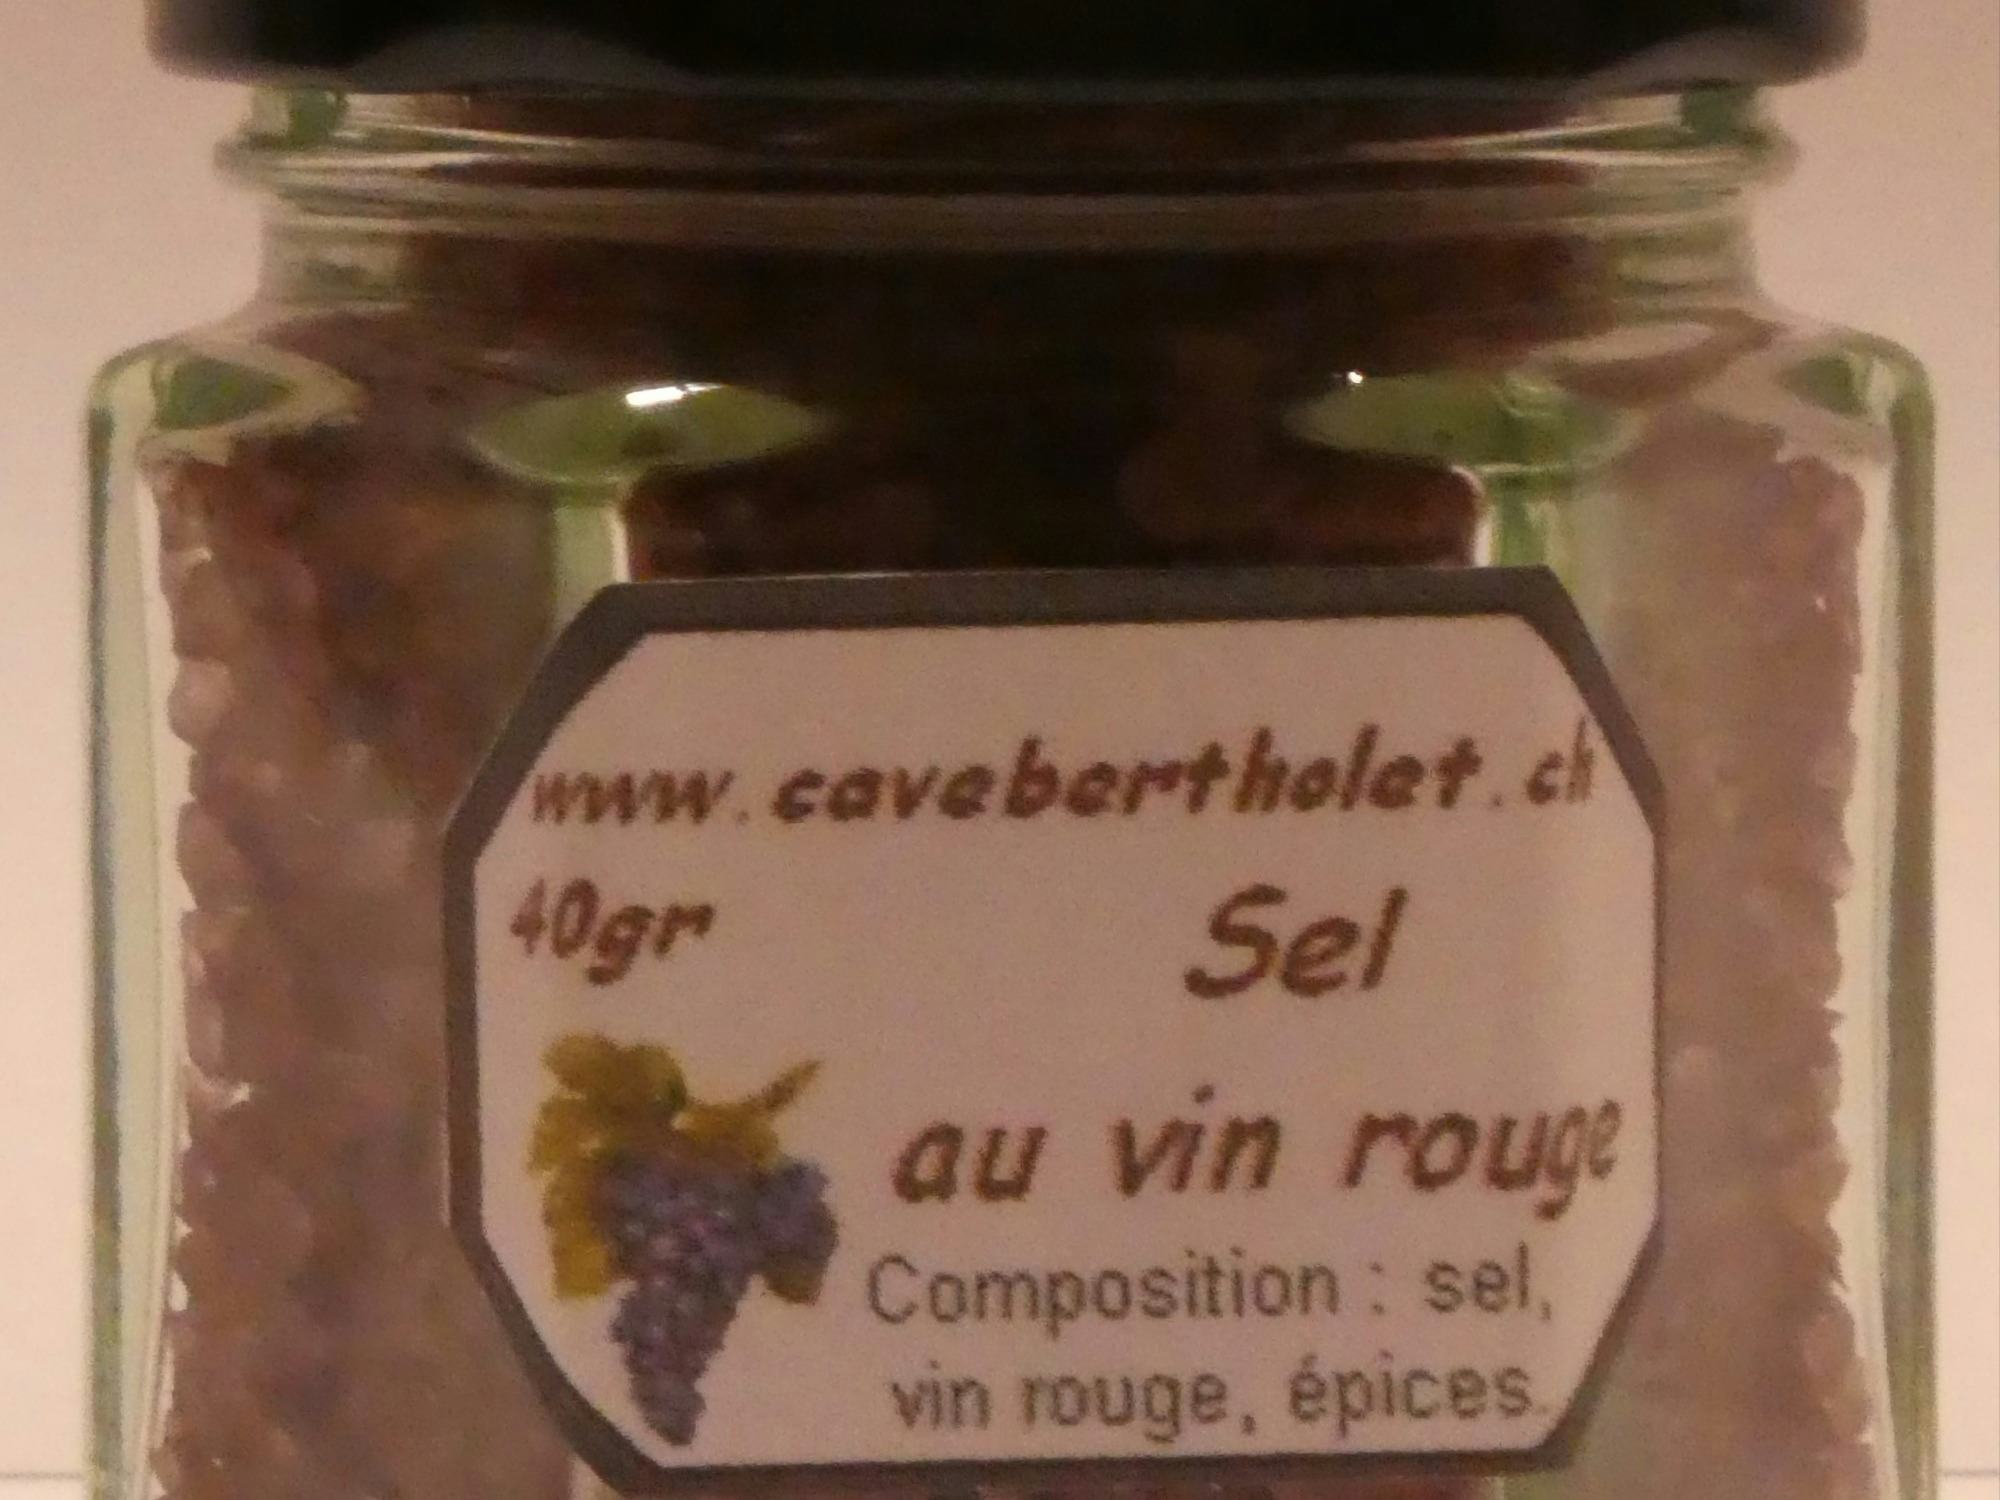 Red wine salt, artisanal product for direct sale in Switzerland